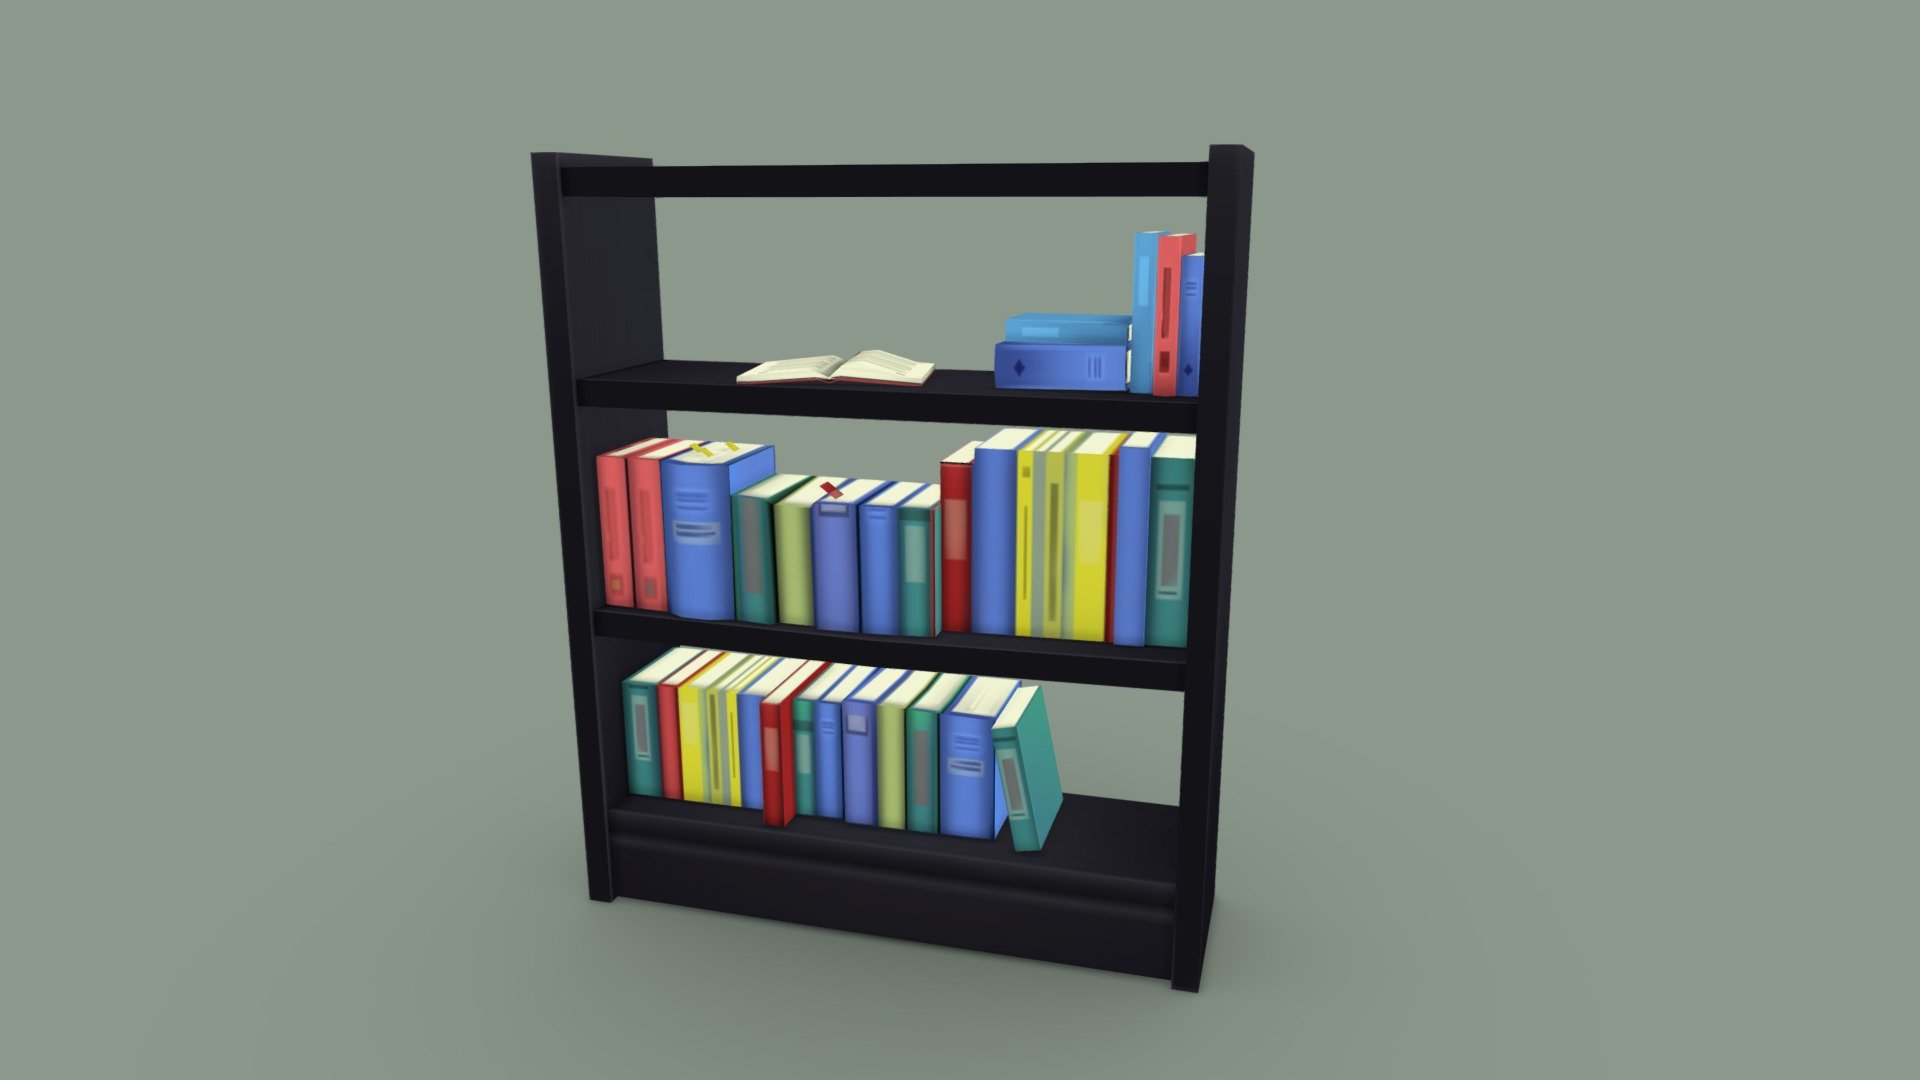 A bookshelf, created with blender and Photoshop.
Since I included the book models from day 10, the triangle count of the file is higher than 300. The shelfmesh alone has 178 triangles 3d model